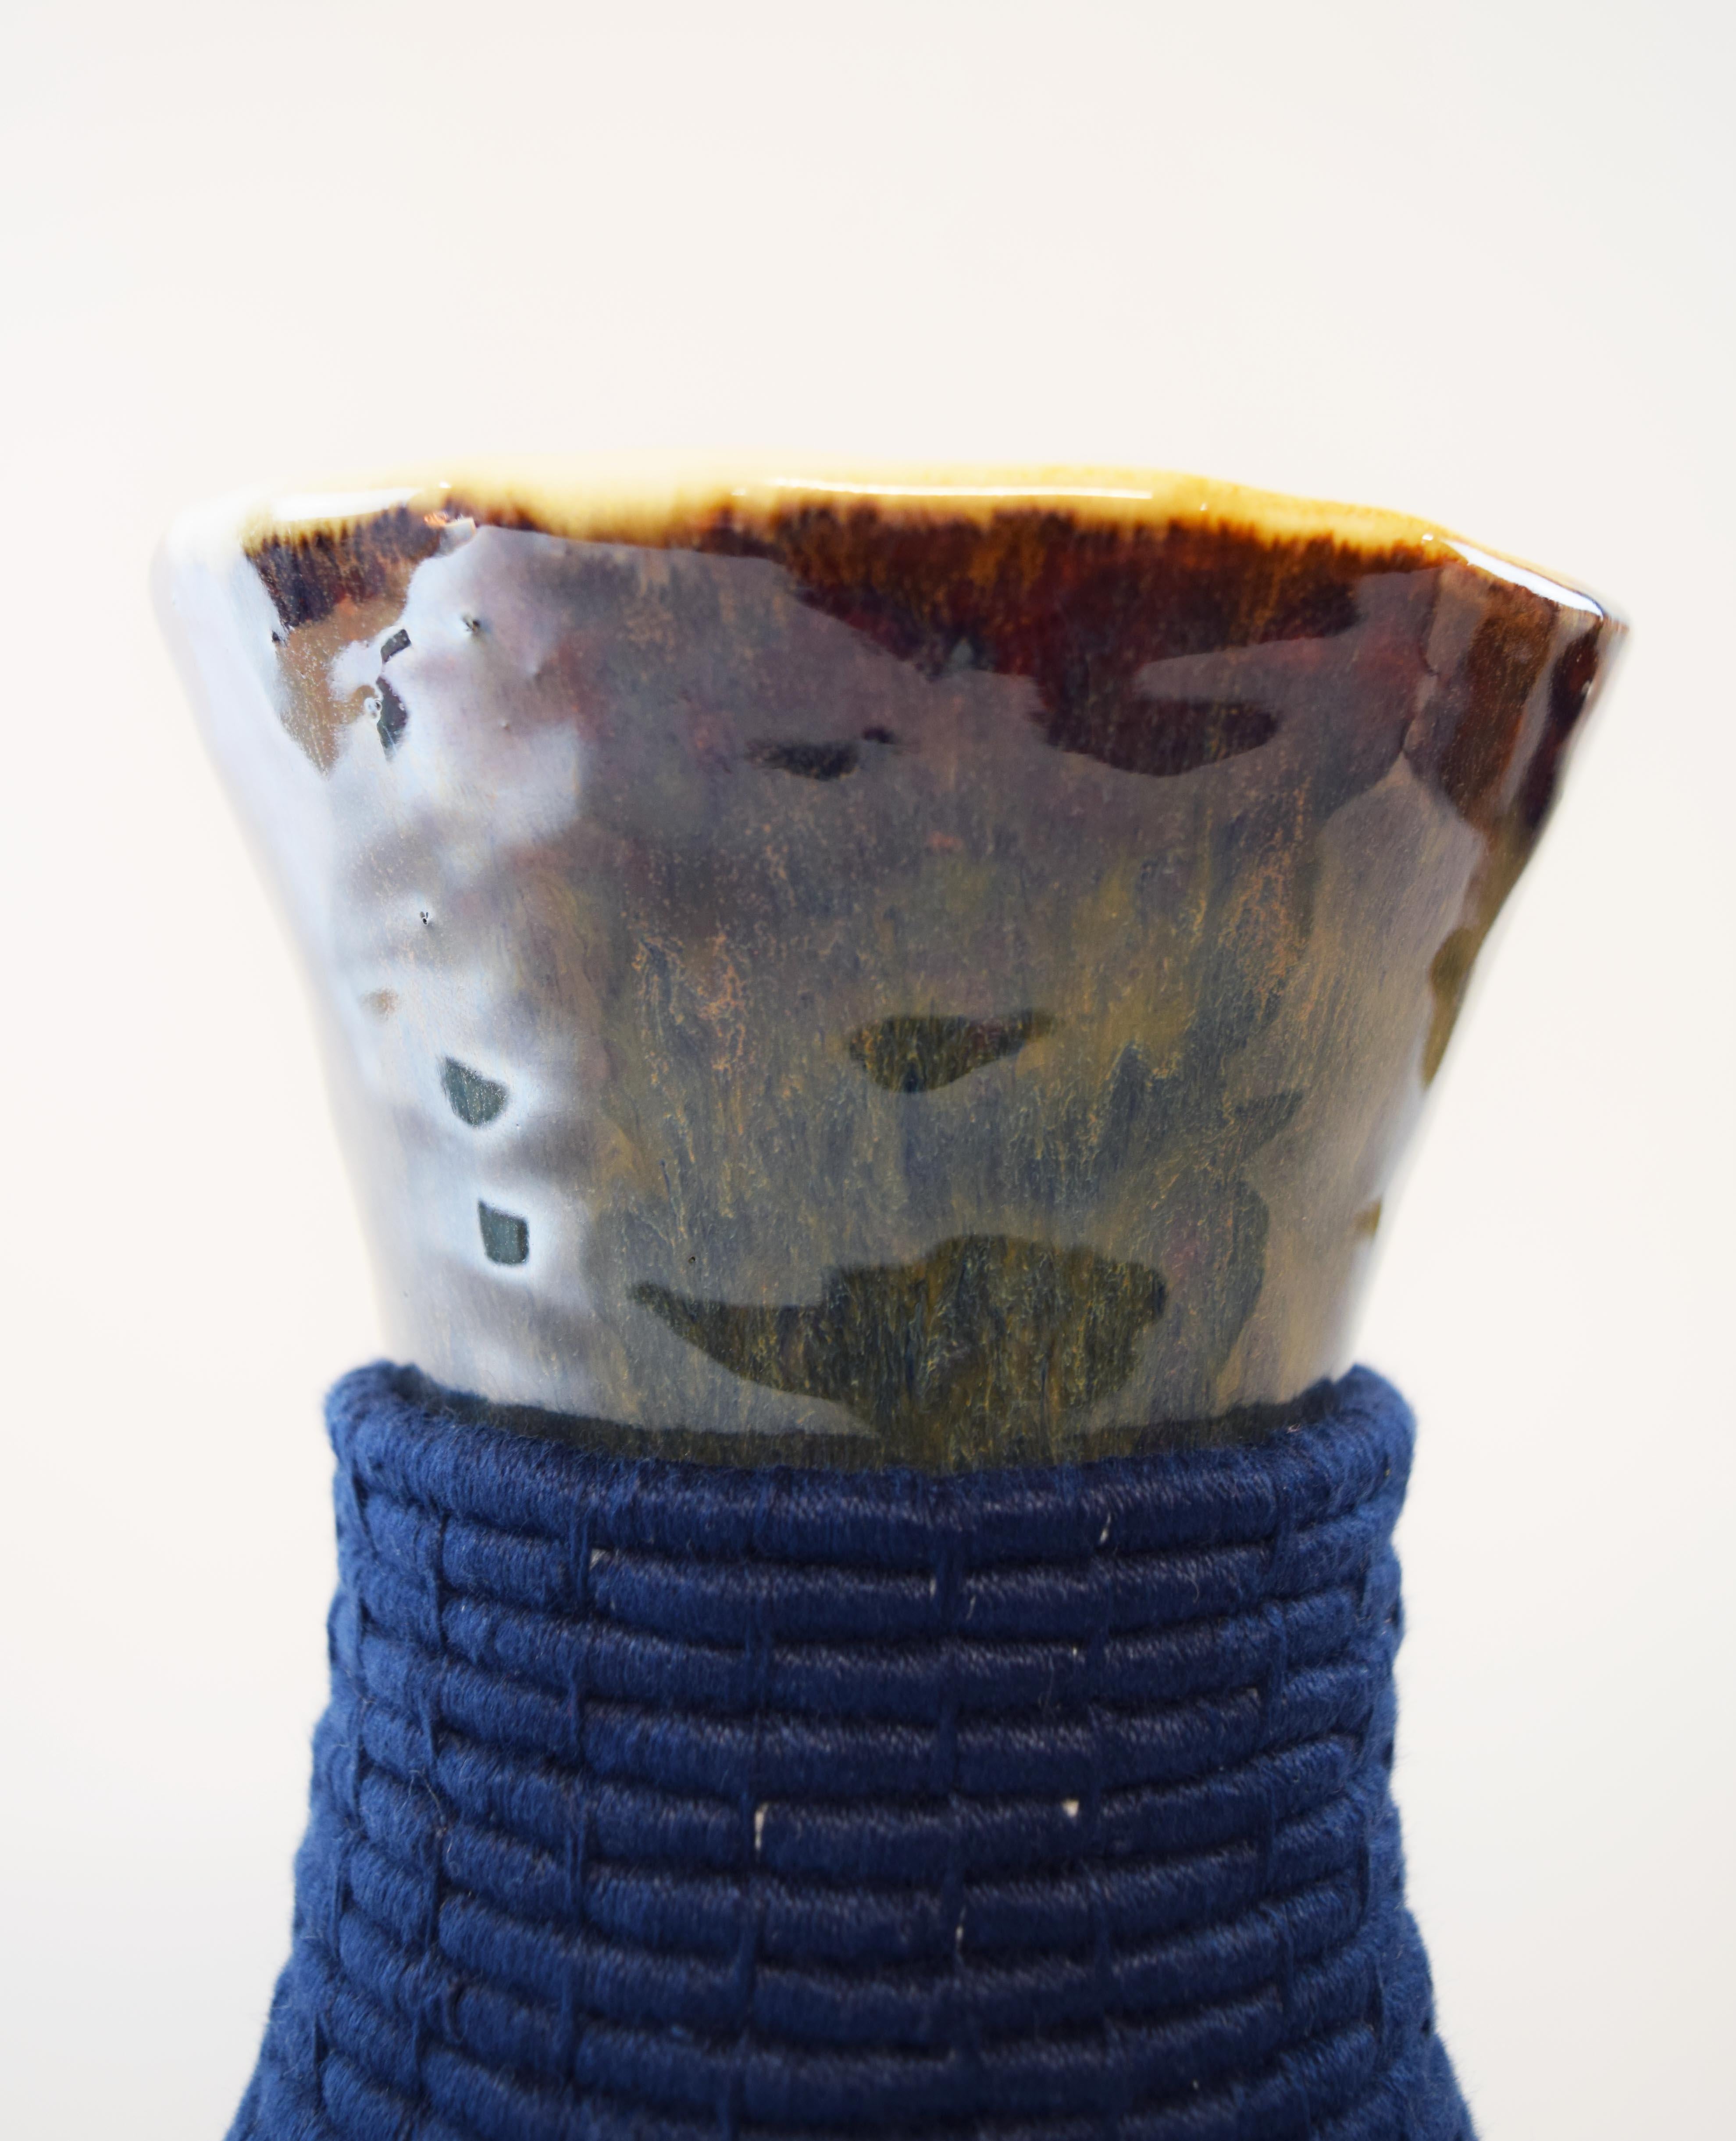 Organic Modern One of a Kind Ceramic Vase #768, Multi-Colored Glaze & Woven Navy Cotton Detail